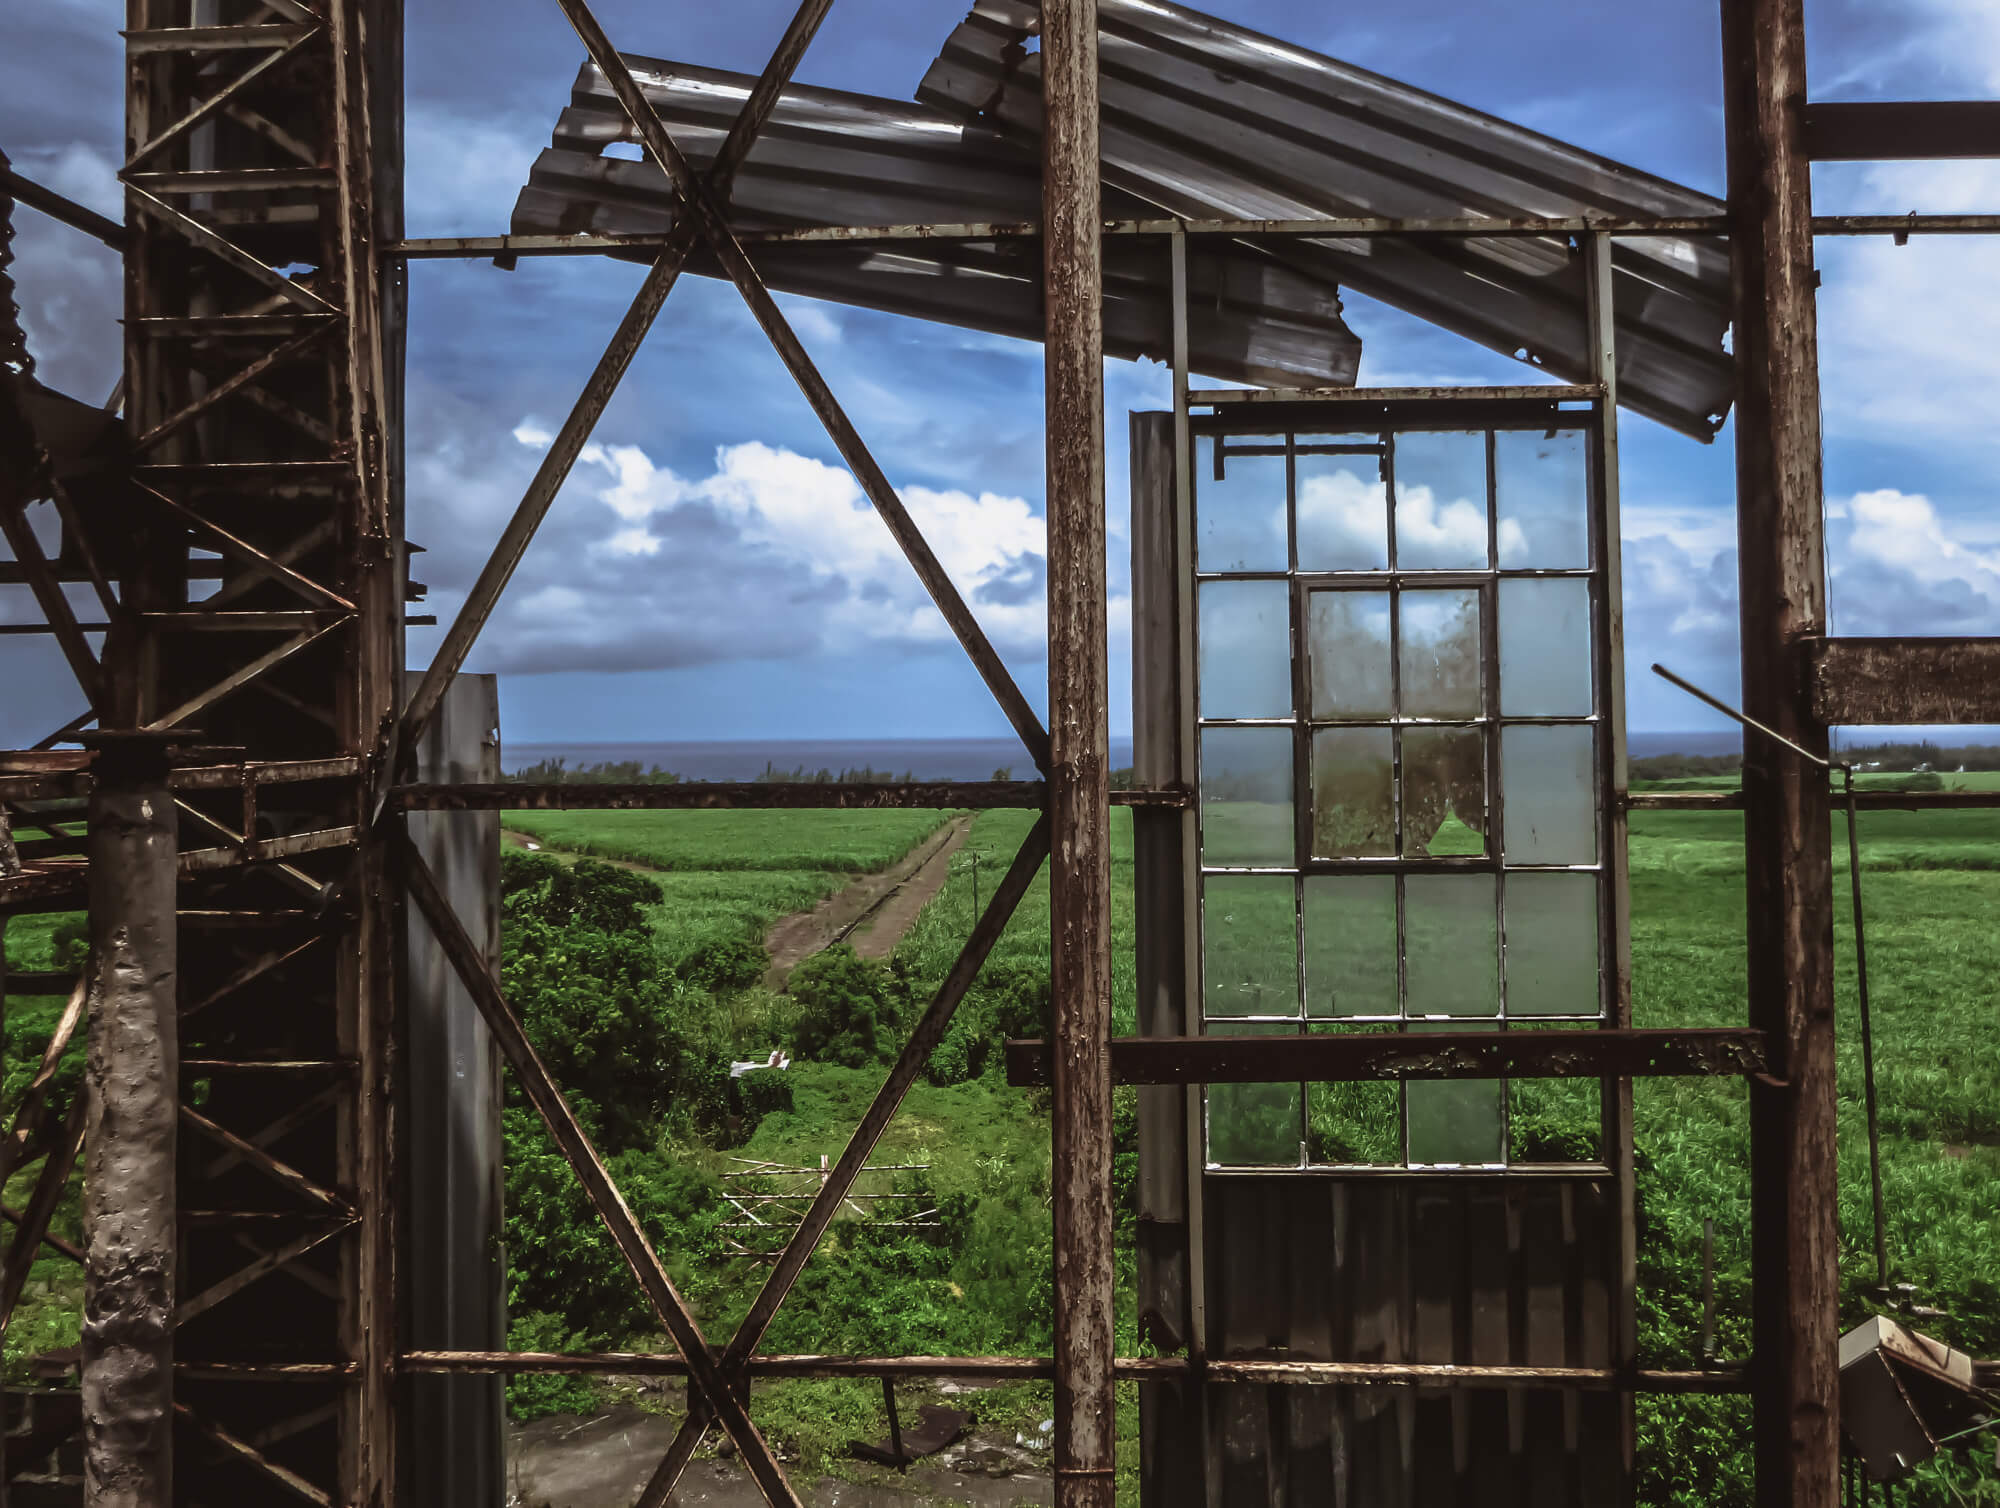 Climbing a rusty factory of questionable safety in Mauritius